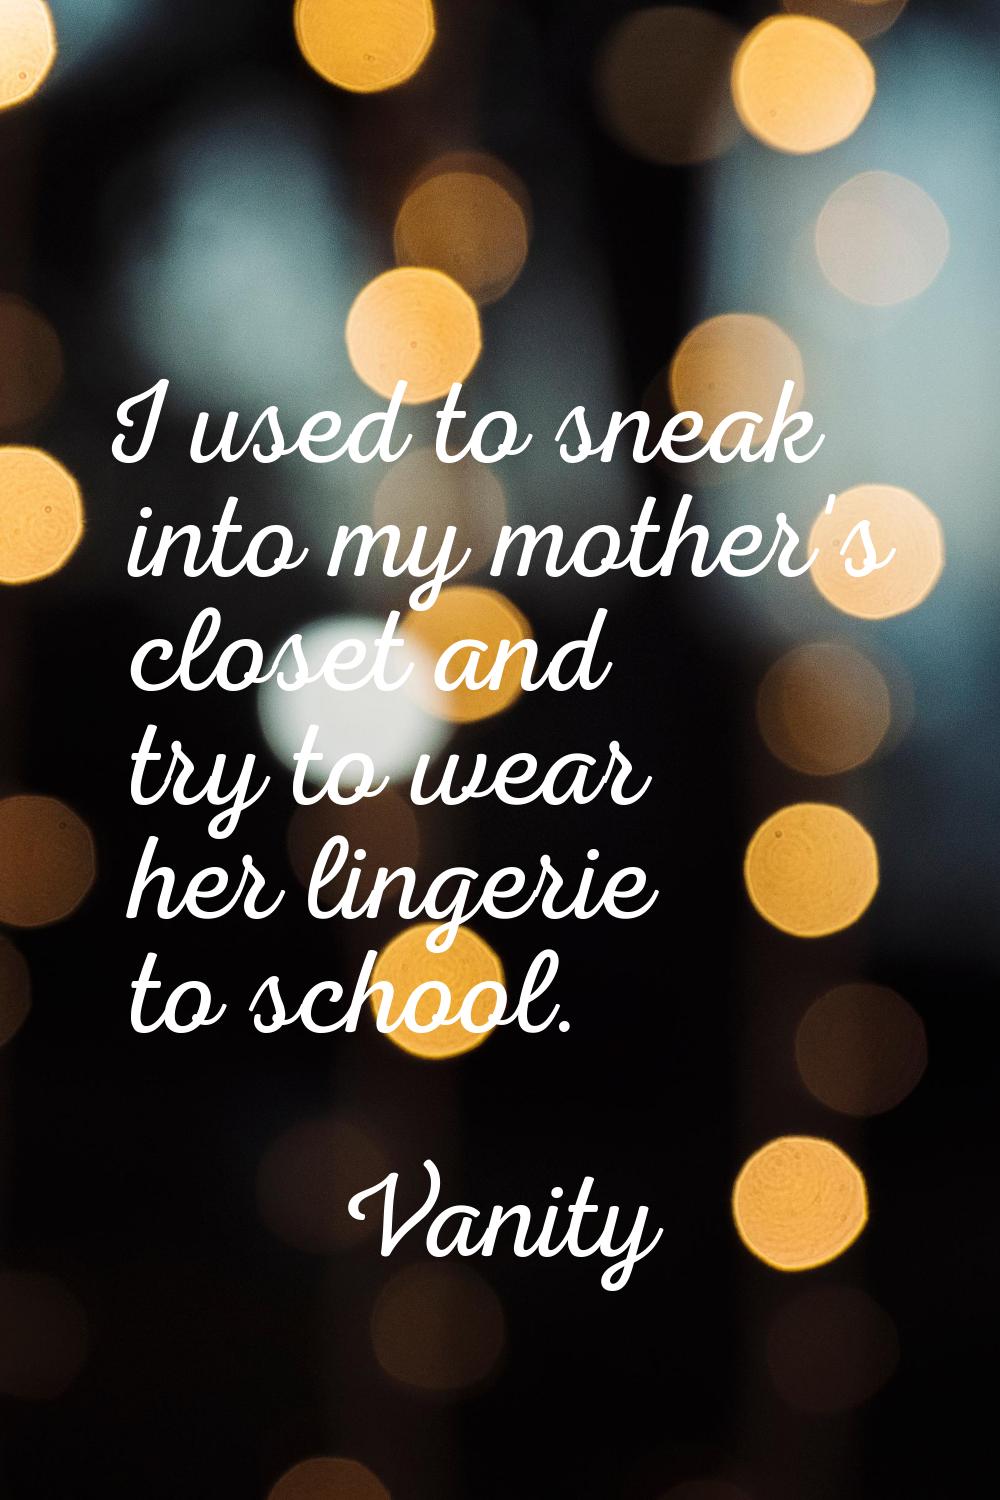 I used to sneak into my mother's closet and try to wear her lingerie to school.